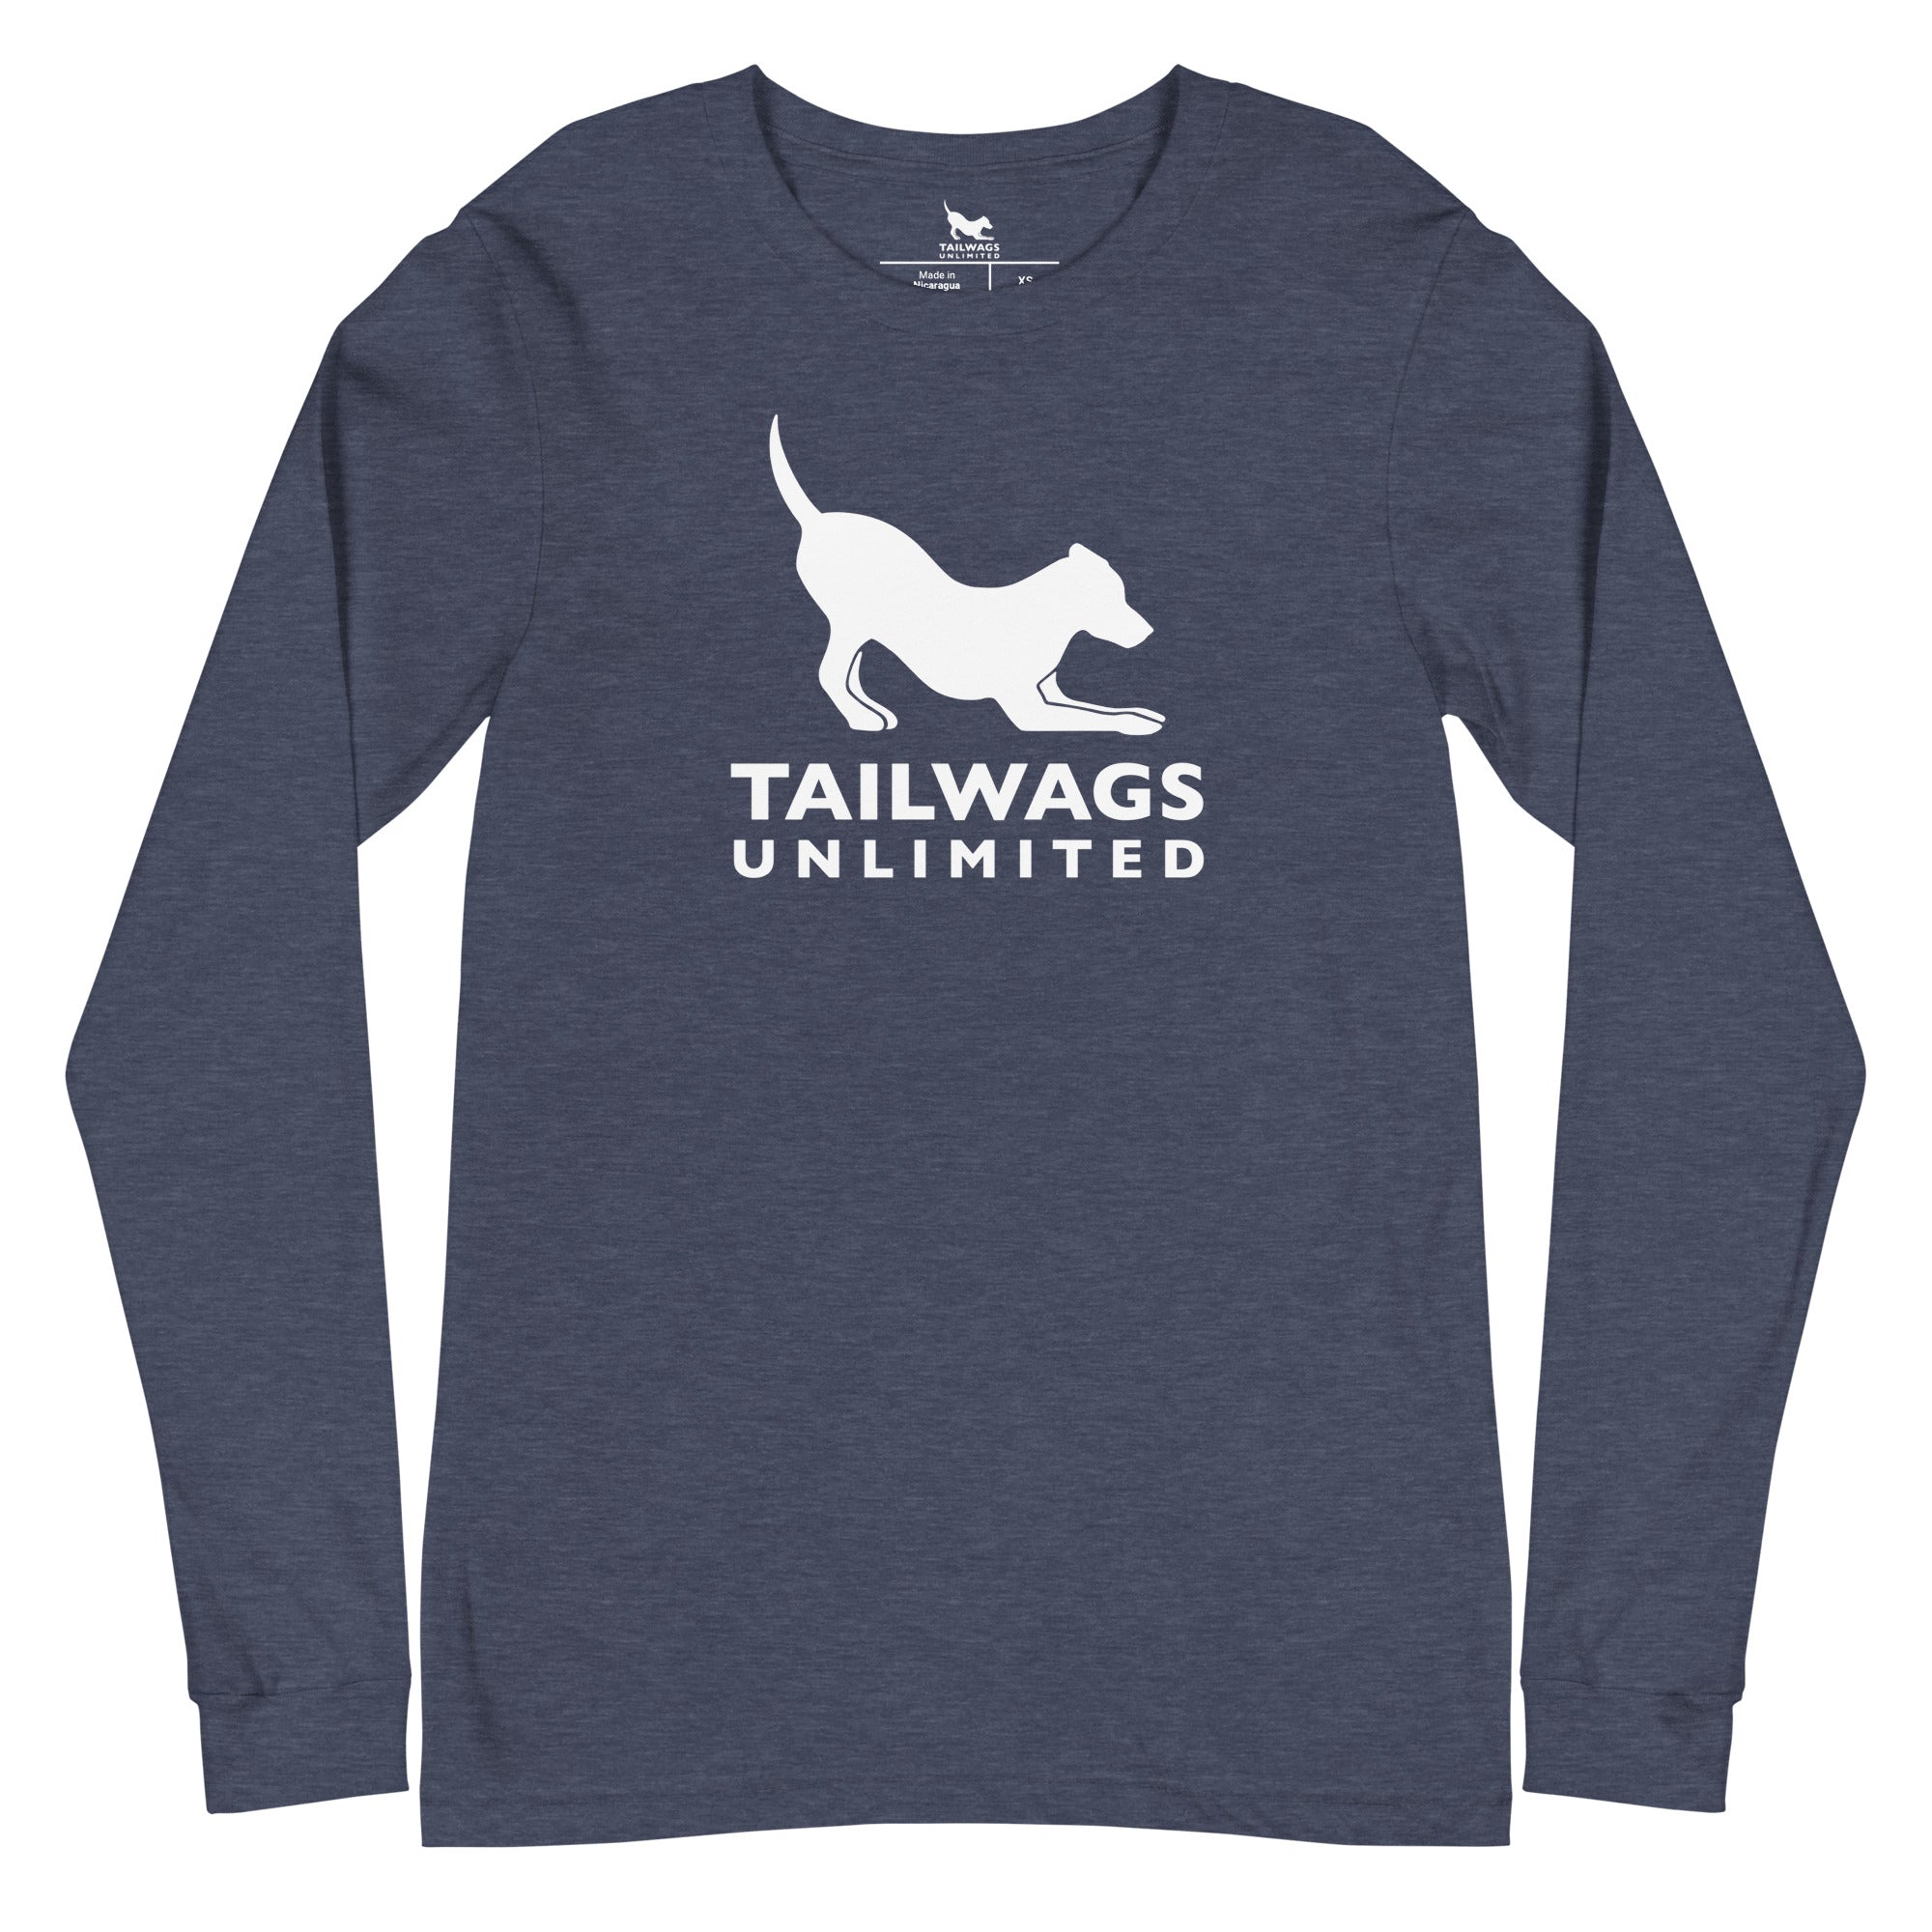 White Logo Long Sleeve Tee - TAILWAGS UNLIMITED